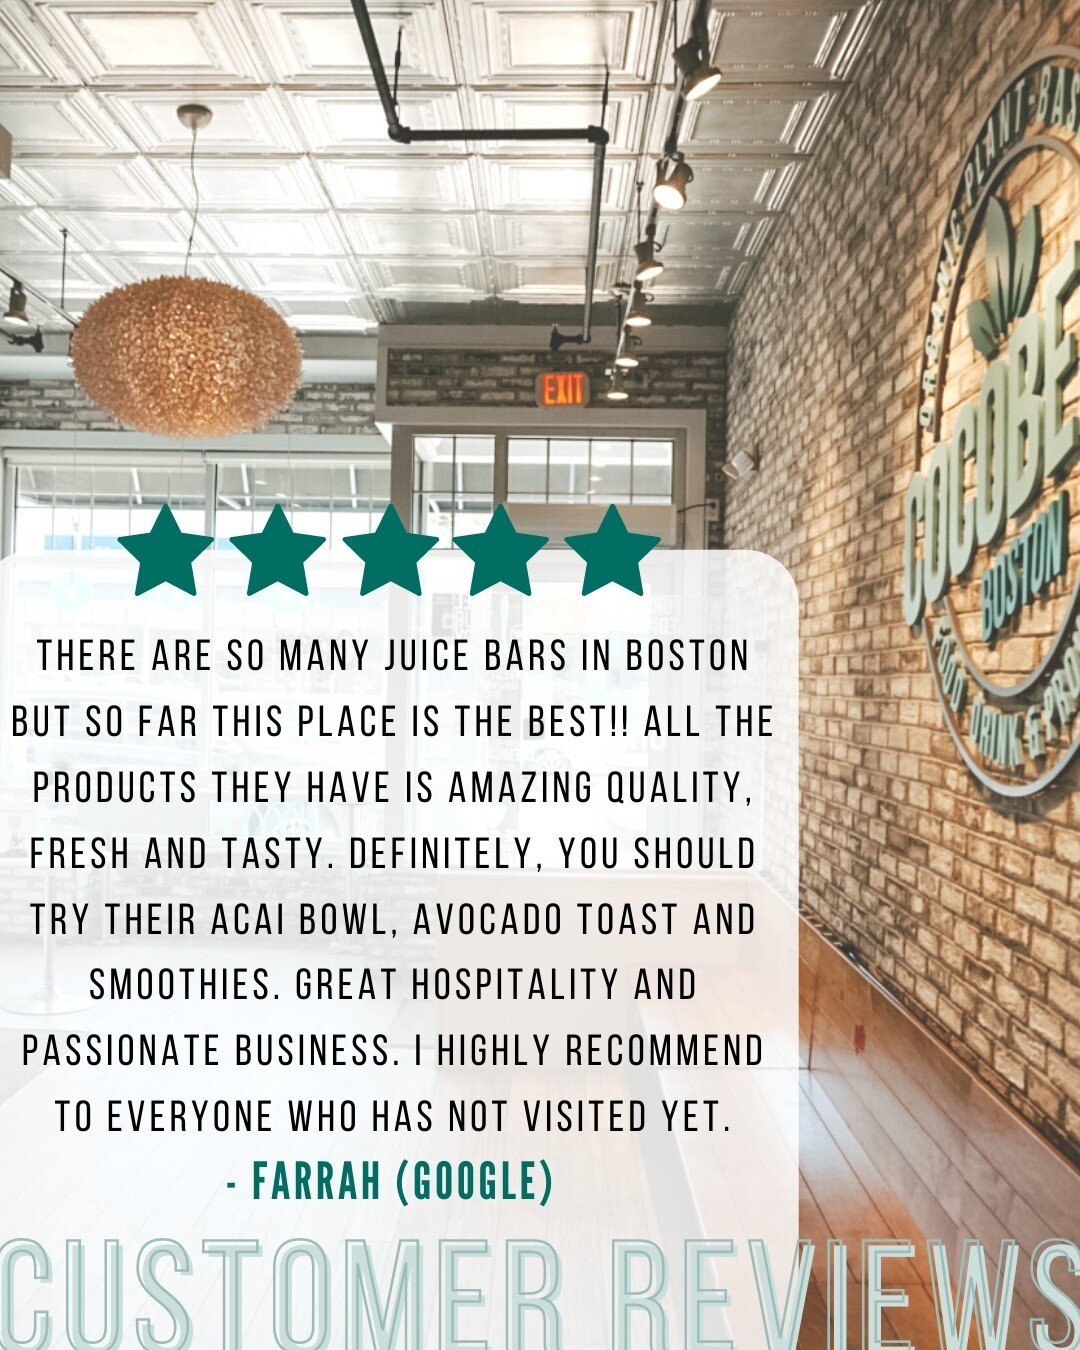 Cocobeet was founded to give people easy access to organic and vegan food in Boston! With convenient, inventive grab-and-go options, we serve our local vegan community with love 🤍

&quot;Great flavors, excellent ingredients. That was my 1st time the